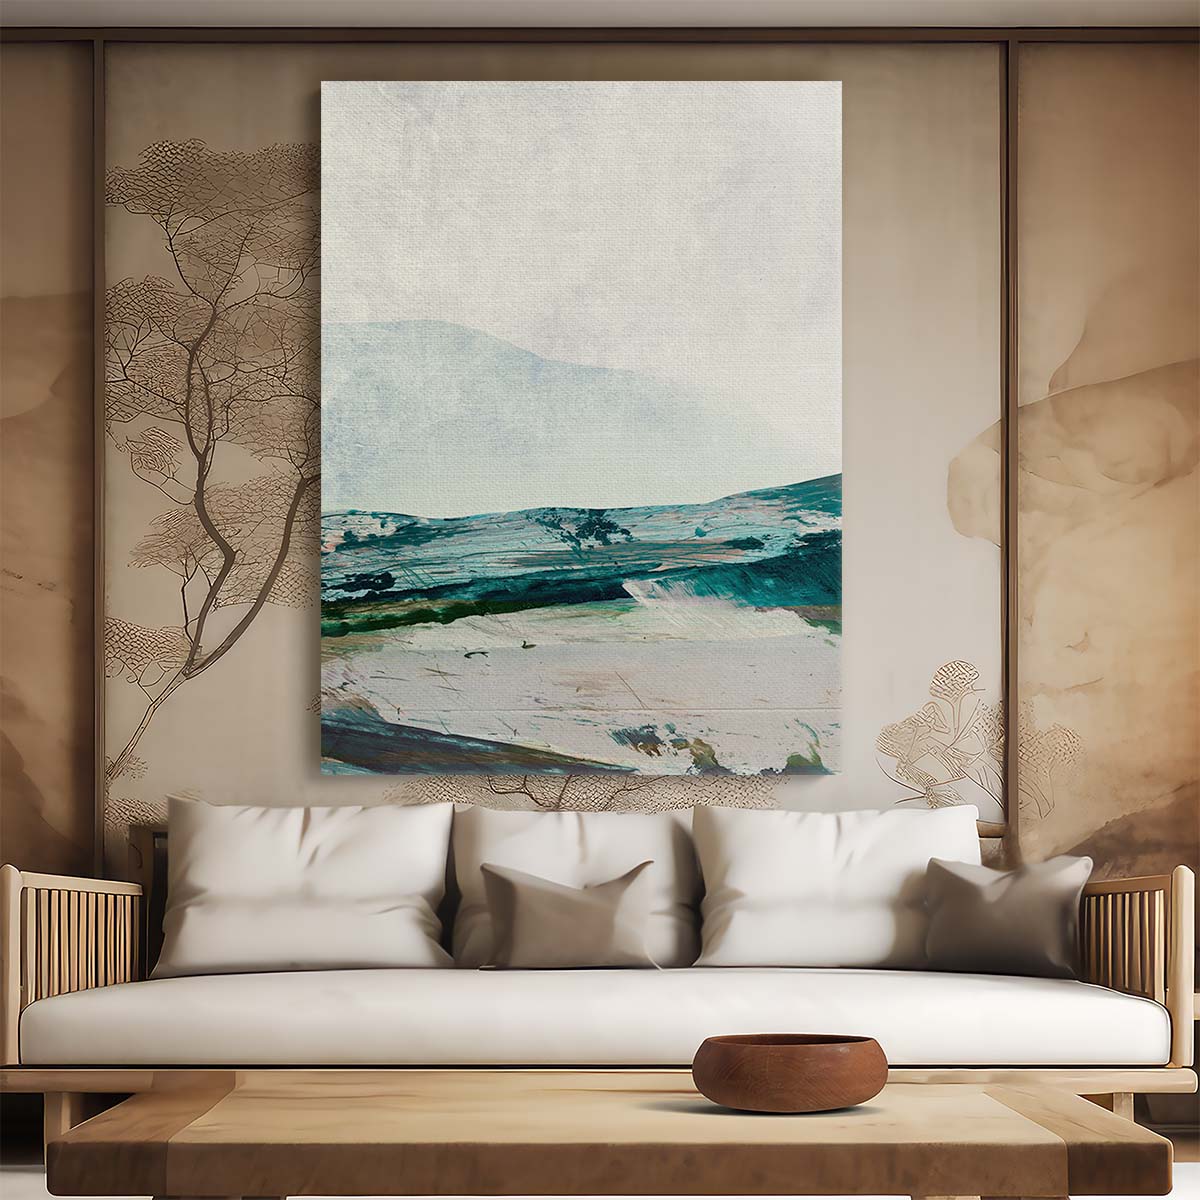 Dan Hobday's Modern Green Mountains Abstract Illustration Art by Luxuriance Designs, made in USA